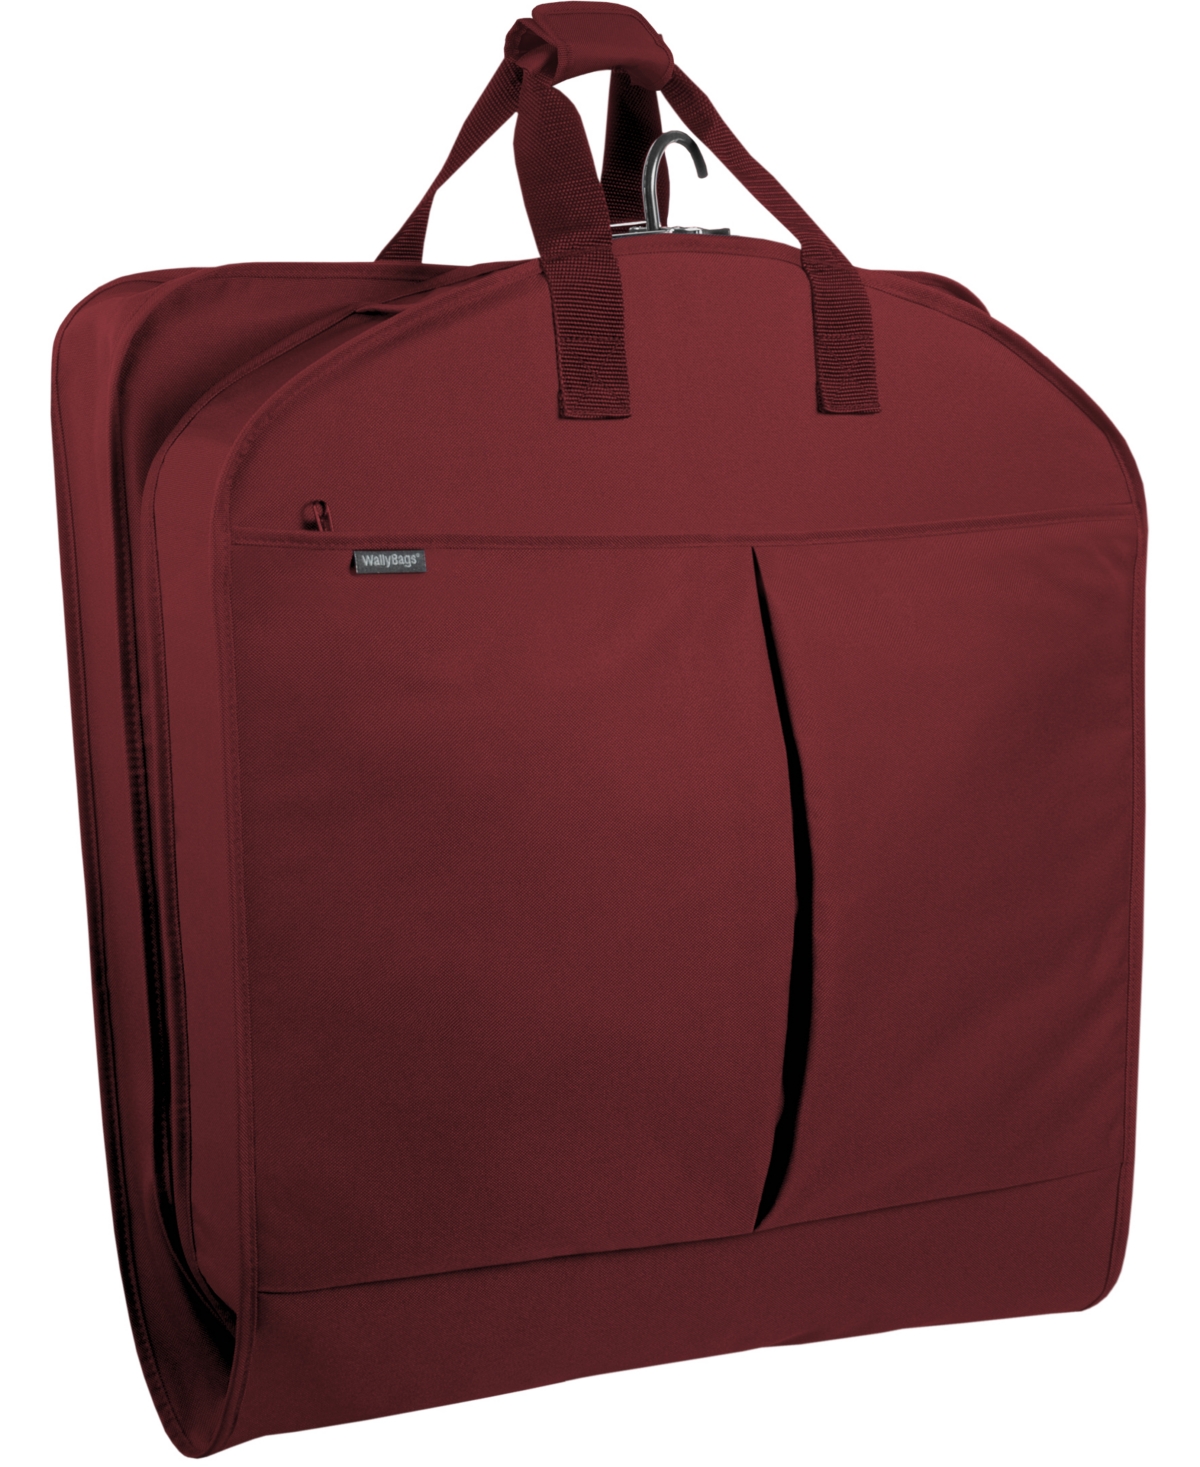 WALLYBAGS 52" DELUXE TRAVEL GARMENT BAG WITH POCKETS